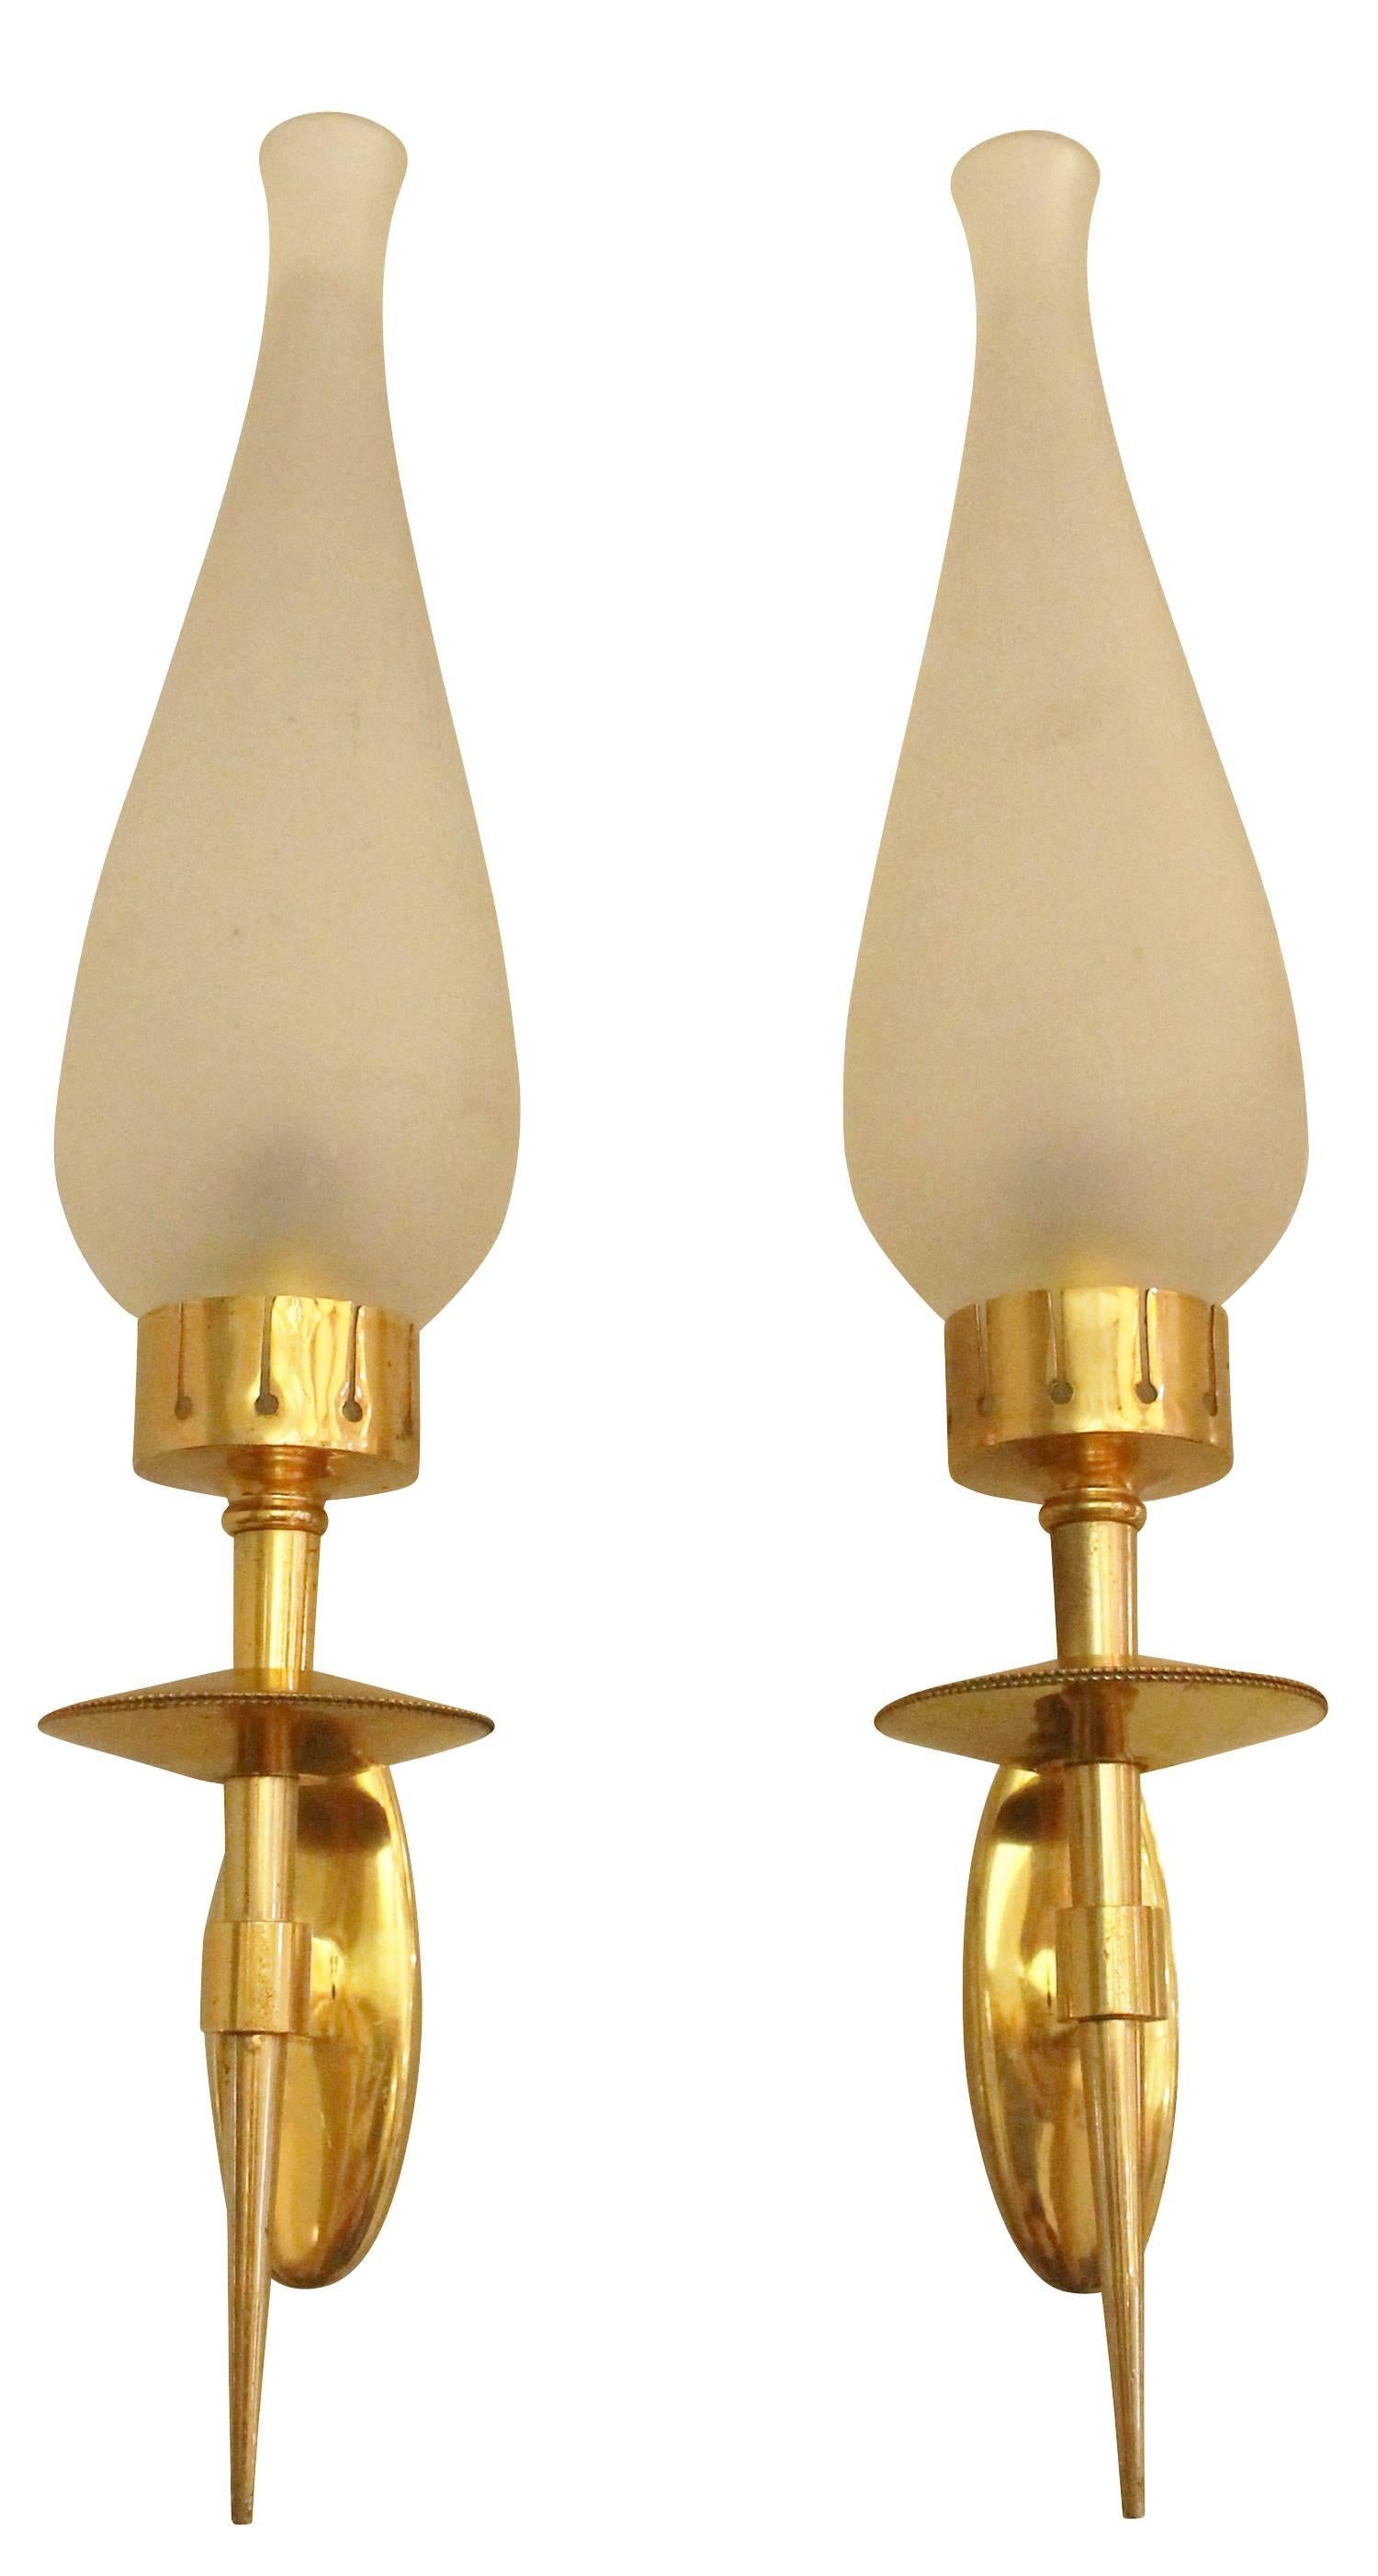 Mid-Century Modern Pair of Sconces in the Manner of Arredoluce